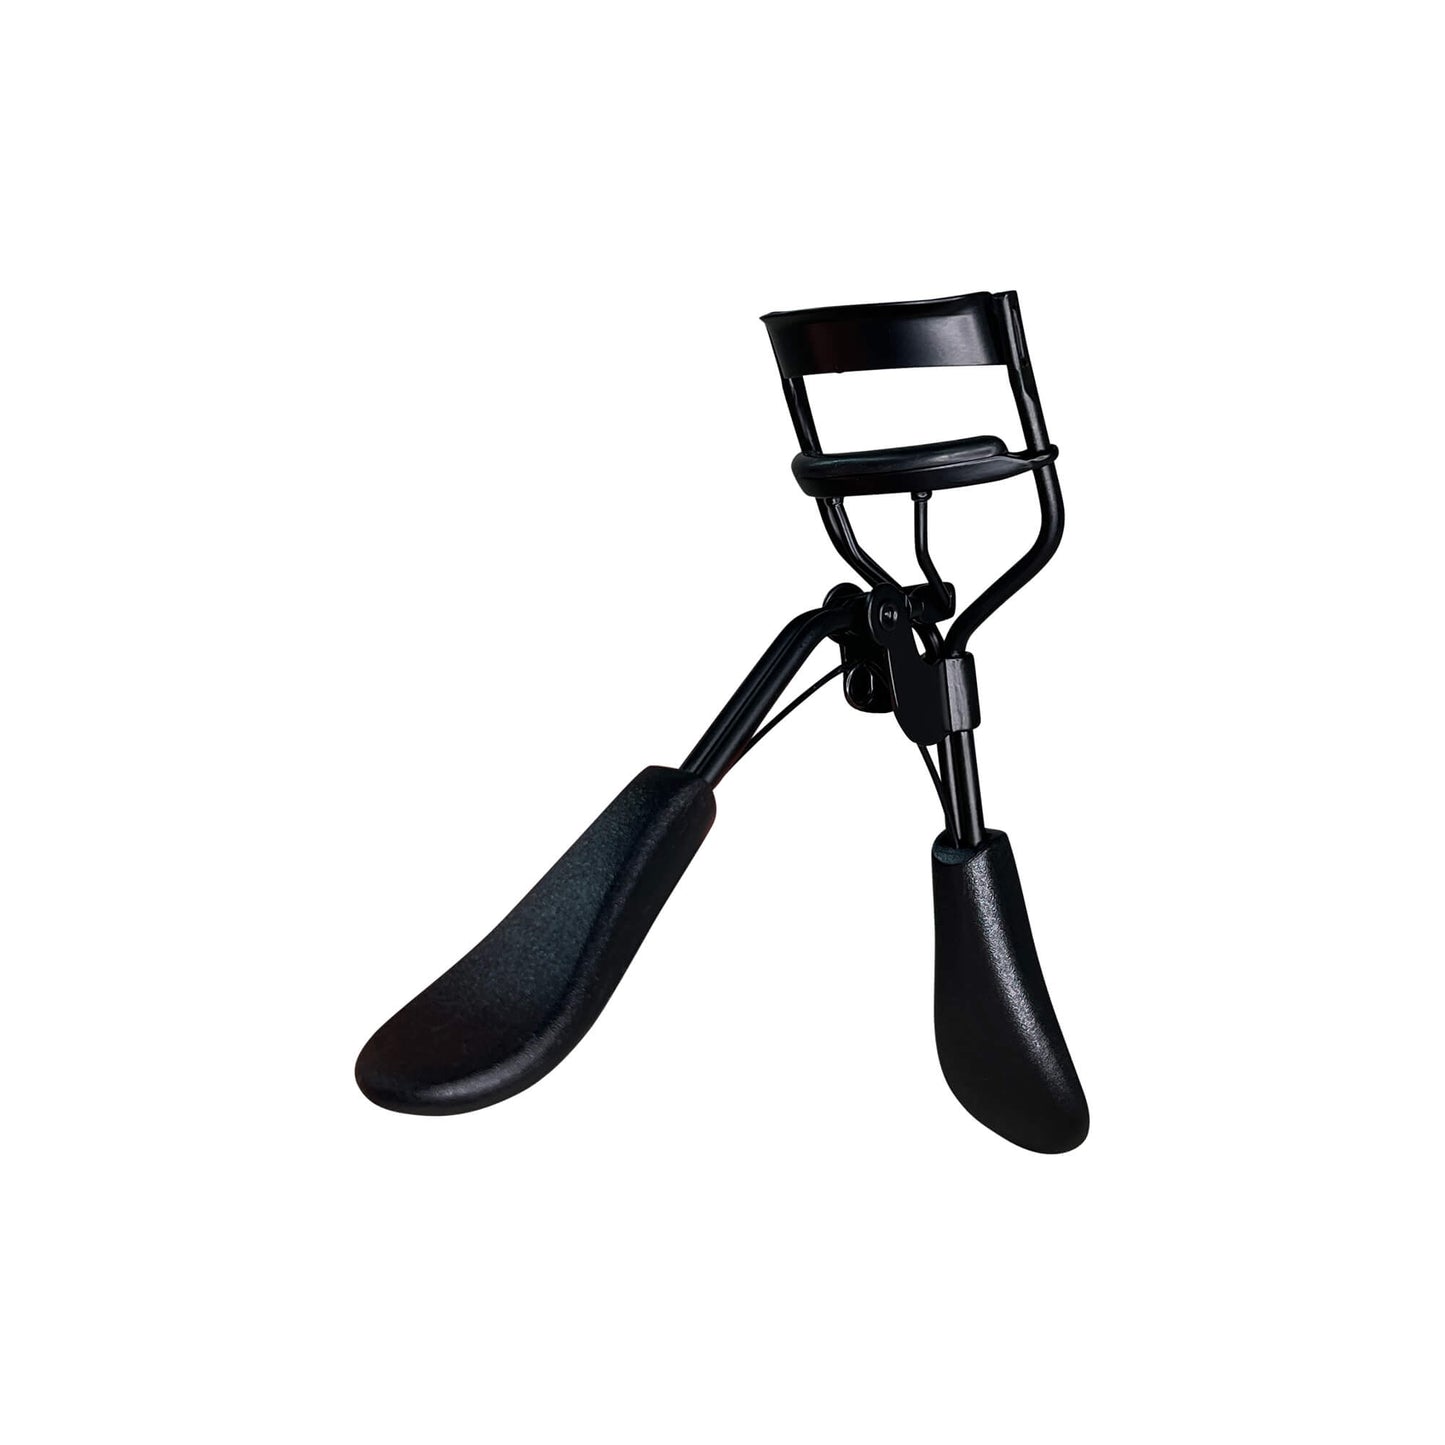 Get the perfect fluttery lashes with our Cruisin Organics Padded Eyelash Curler. The padded handles and silicone pad ensure a comfortable and long-lasting lash curl. Its curved and wide mouth fits all eye shapes. Say goodbye to flat lashes with this must-have tool. (Mascara not included).